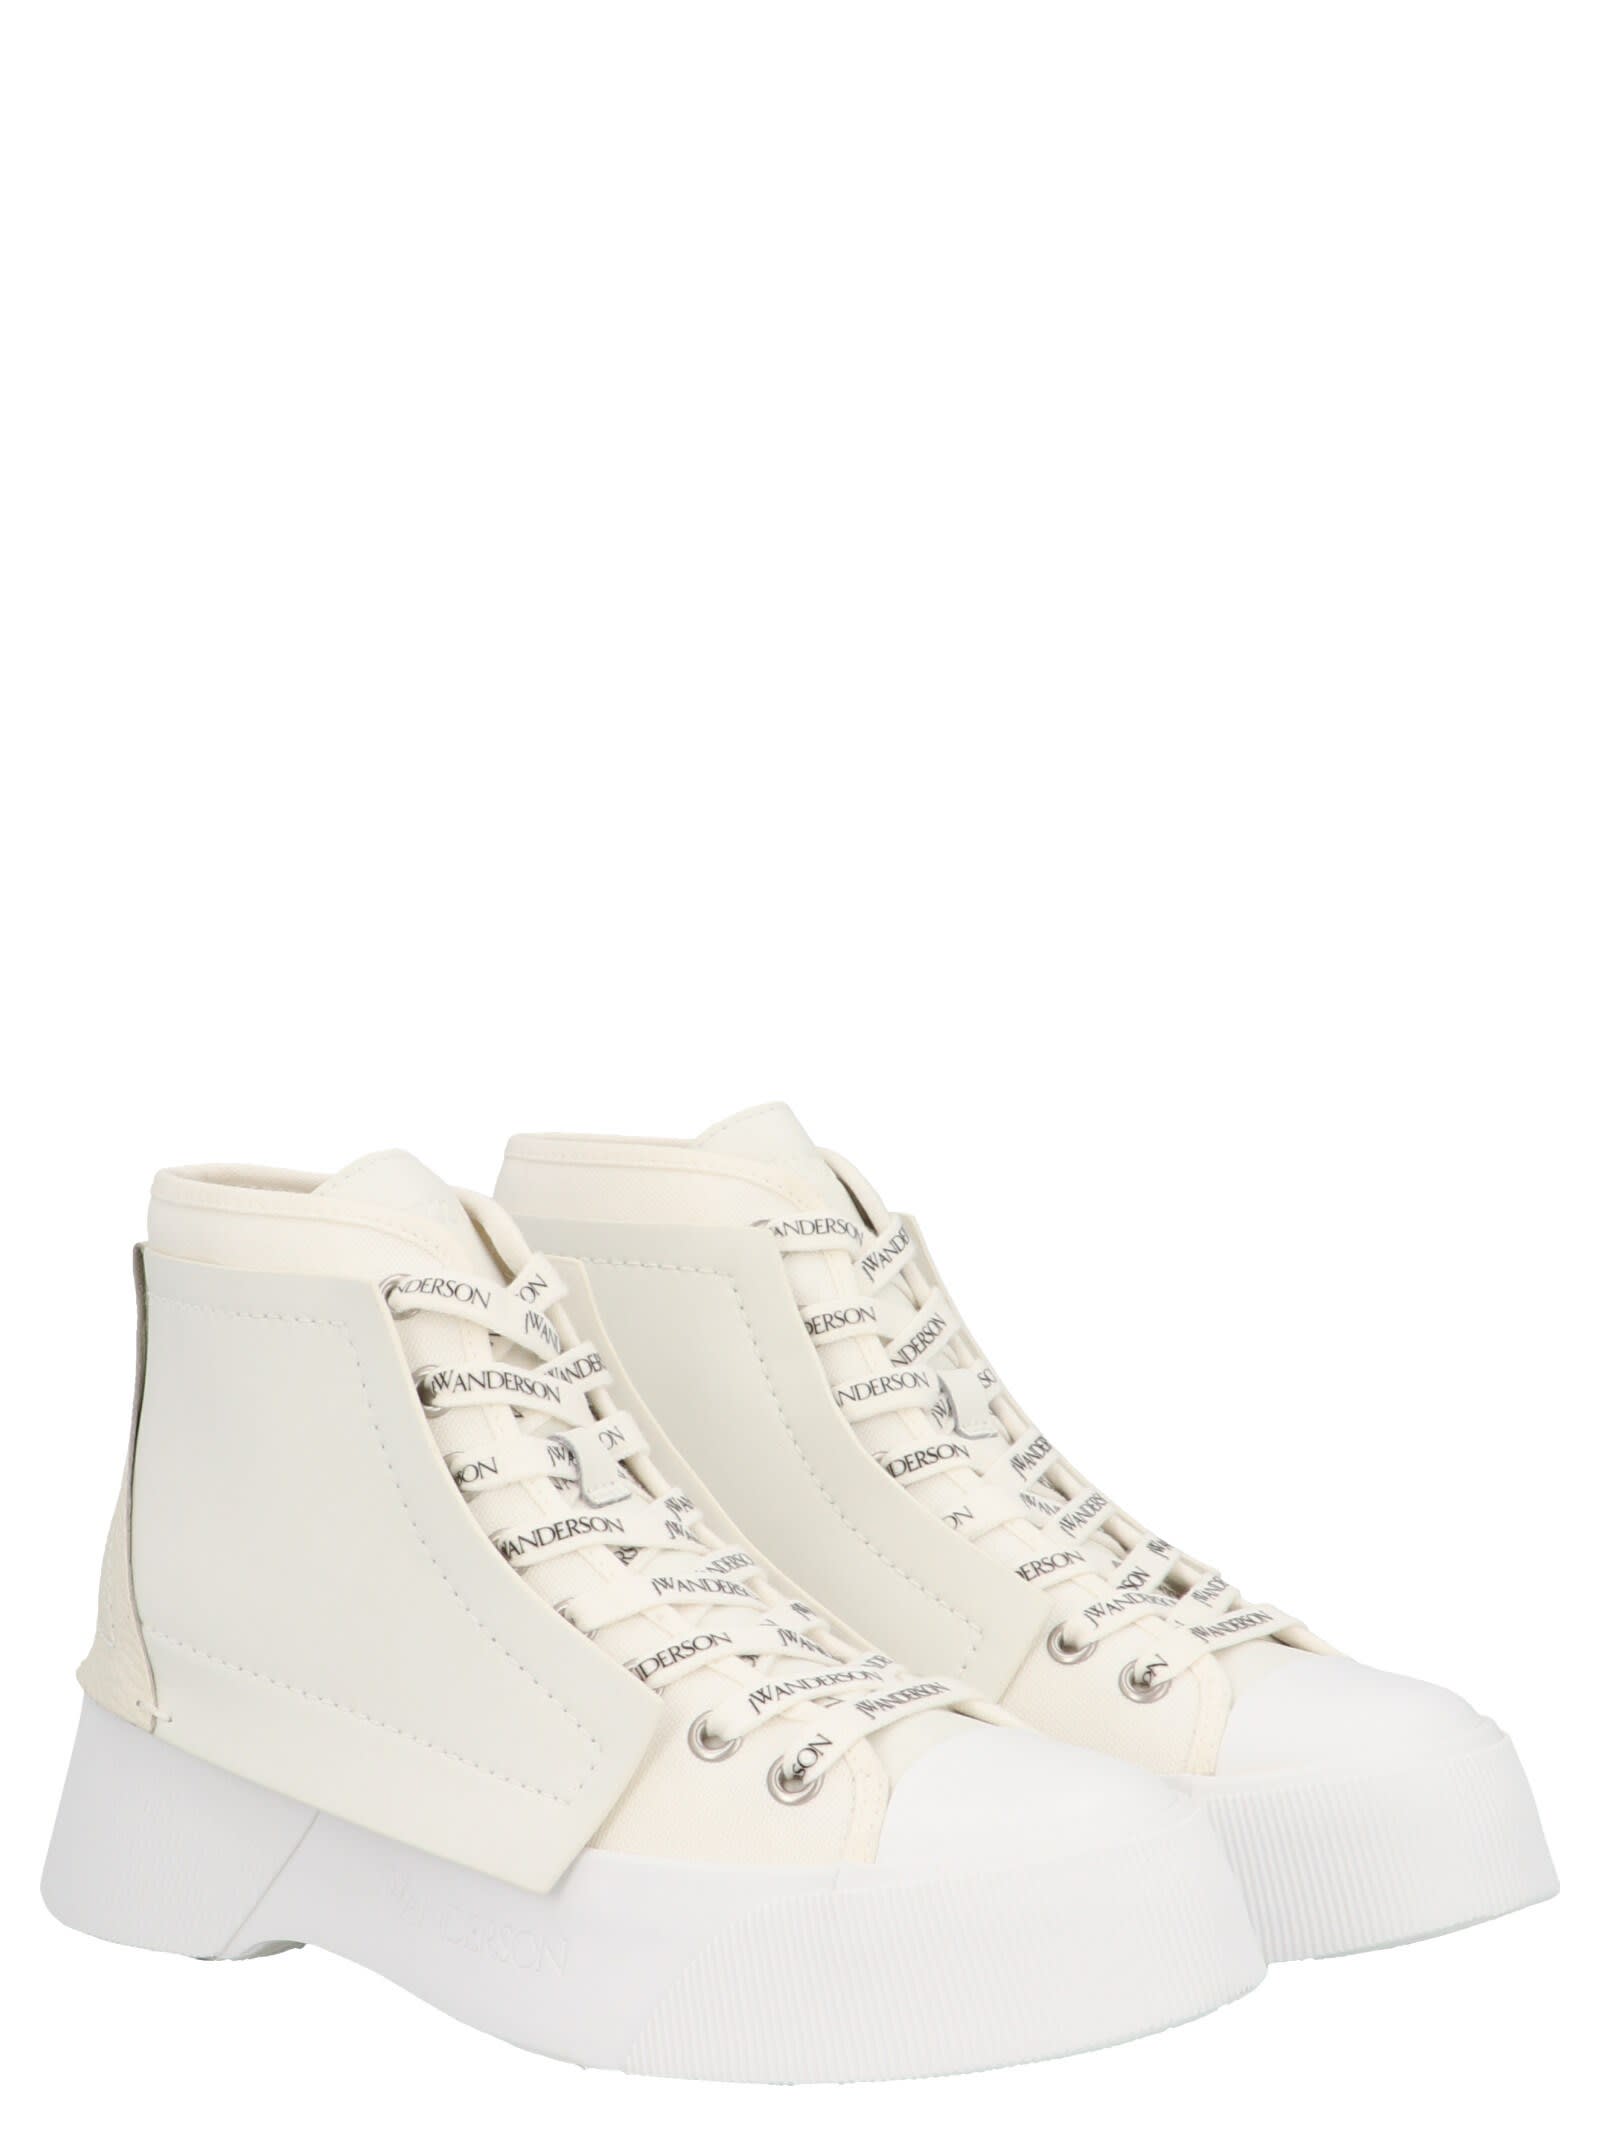 J.W. Anderson trainer High-top Sneakers